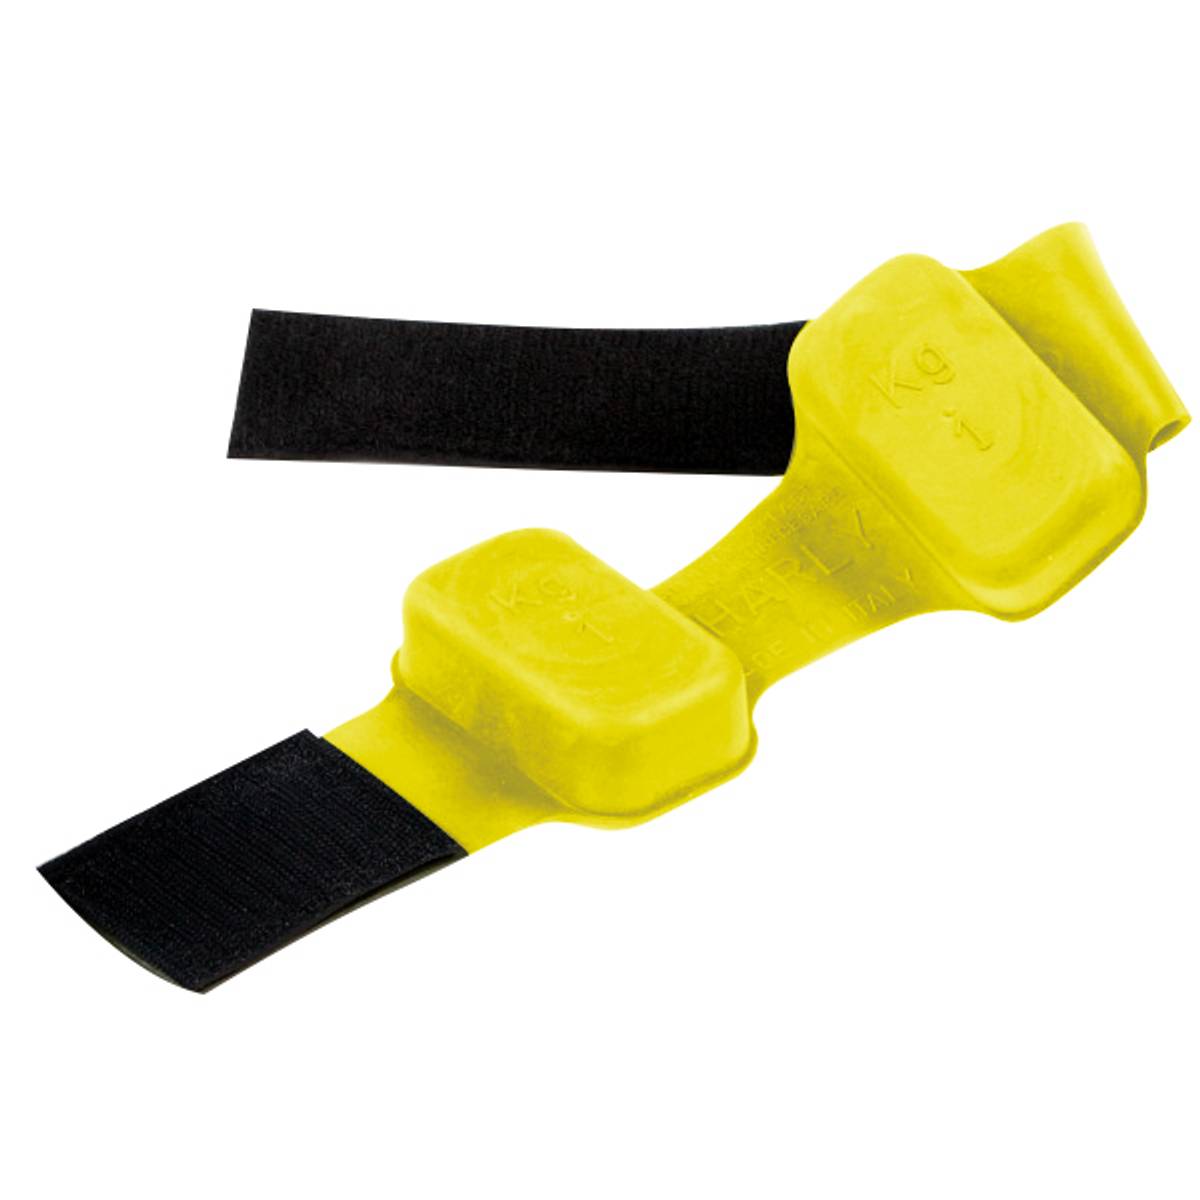 Saplast ankle weight 0.5 kg yellow